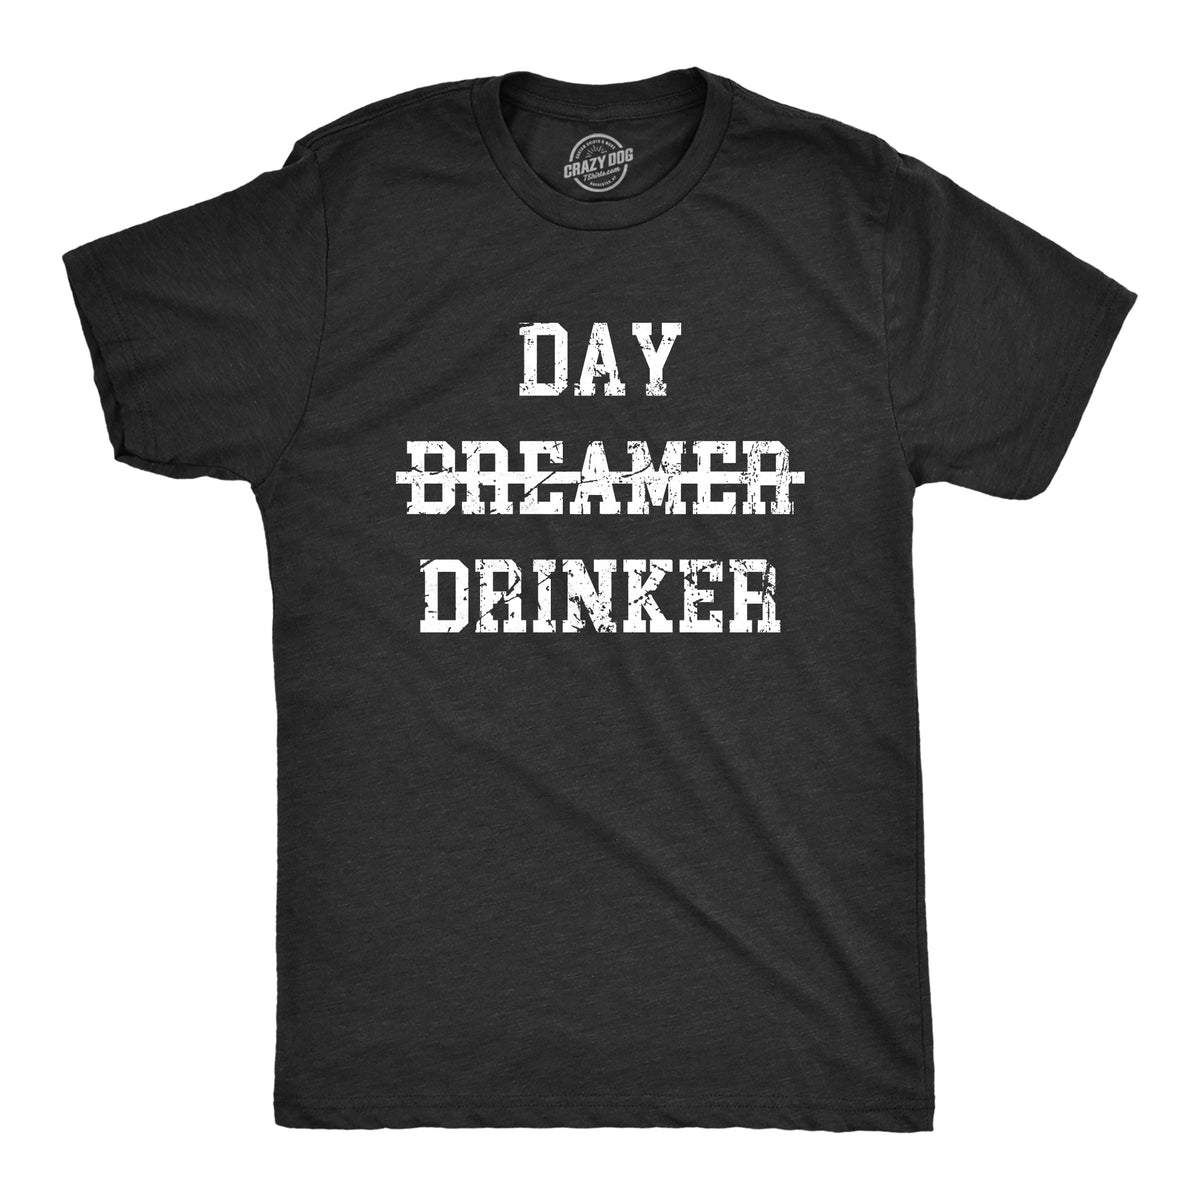 Funny Heather Black - DAY Day Drinker Mens T Shirt Nerdy Drinking Tee